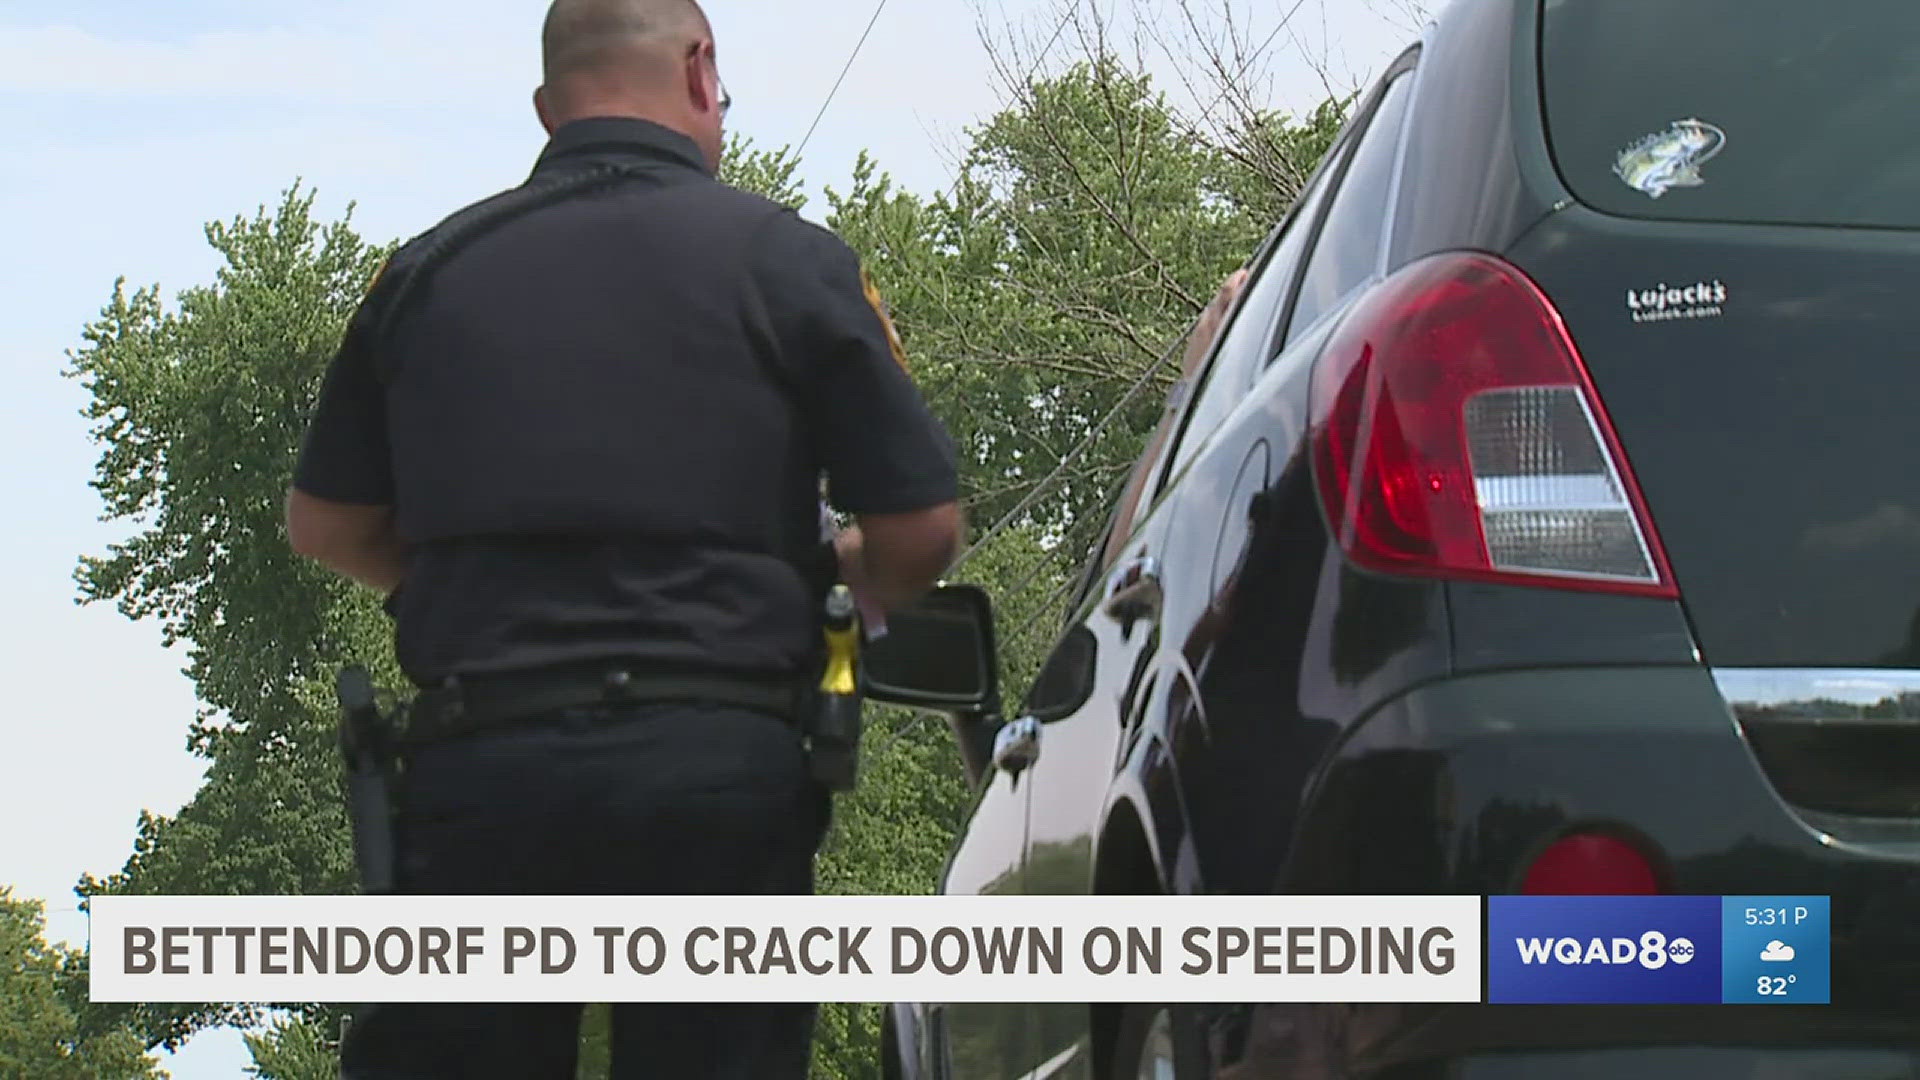 Bettendorf Police Department has received numerous complaints from residents about speeding drivers in the community.